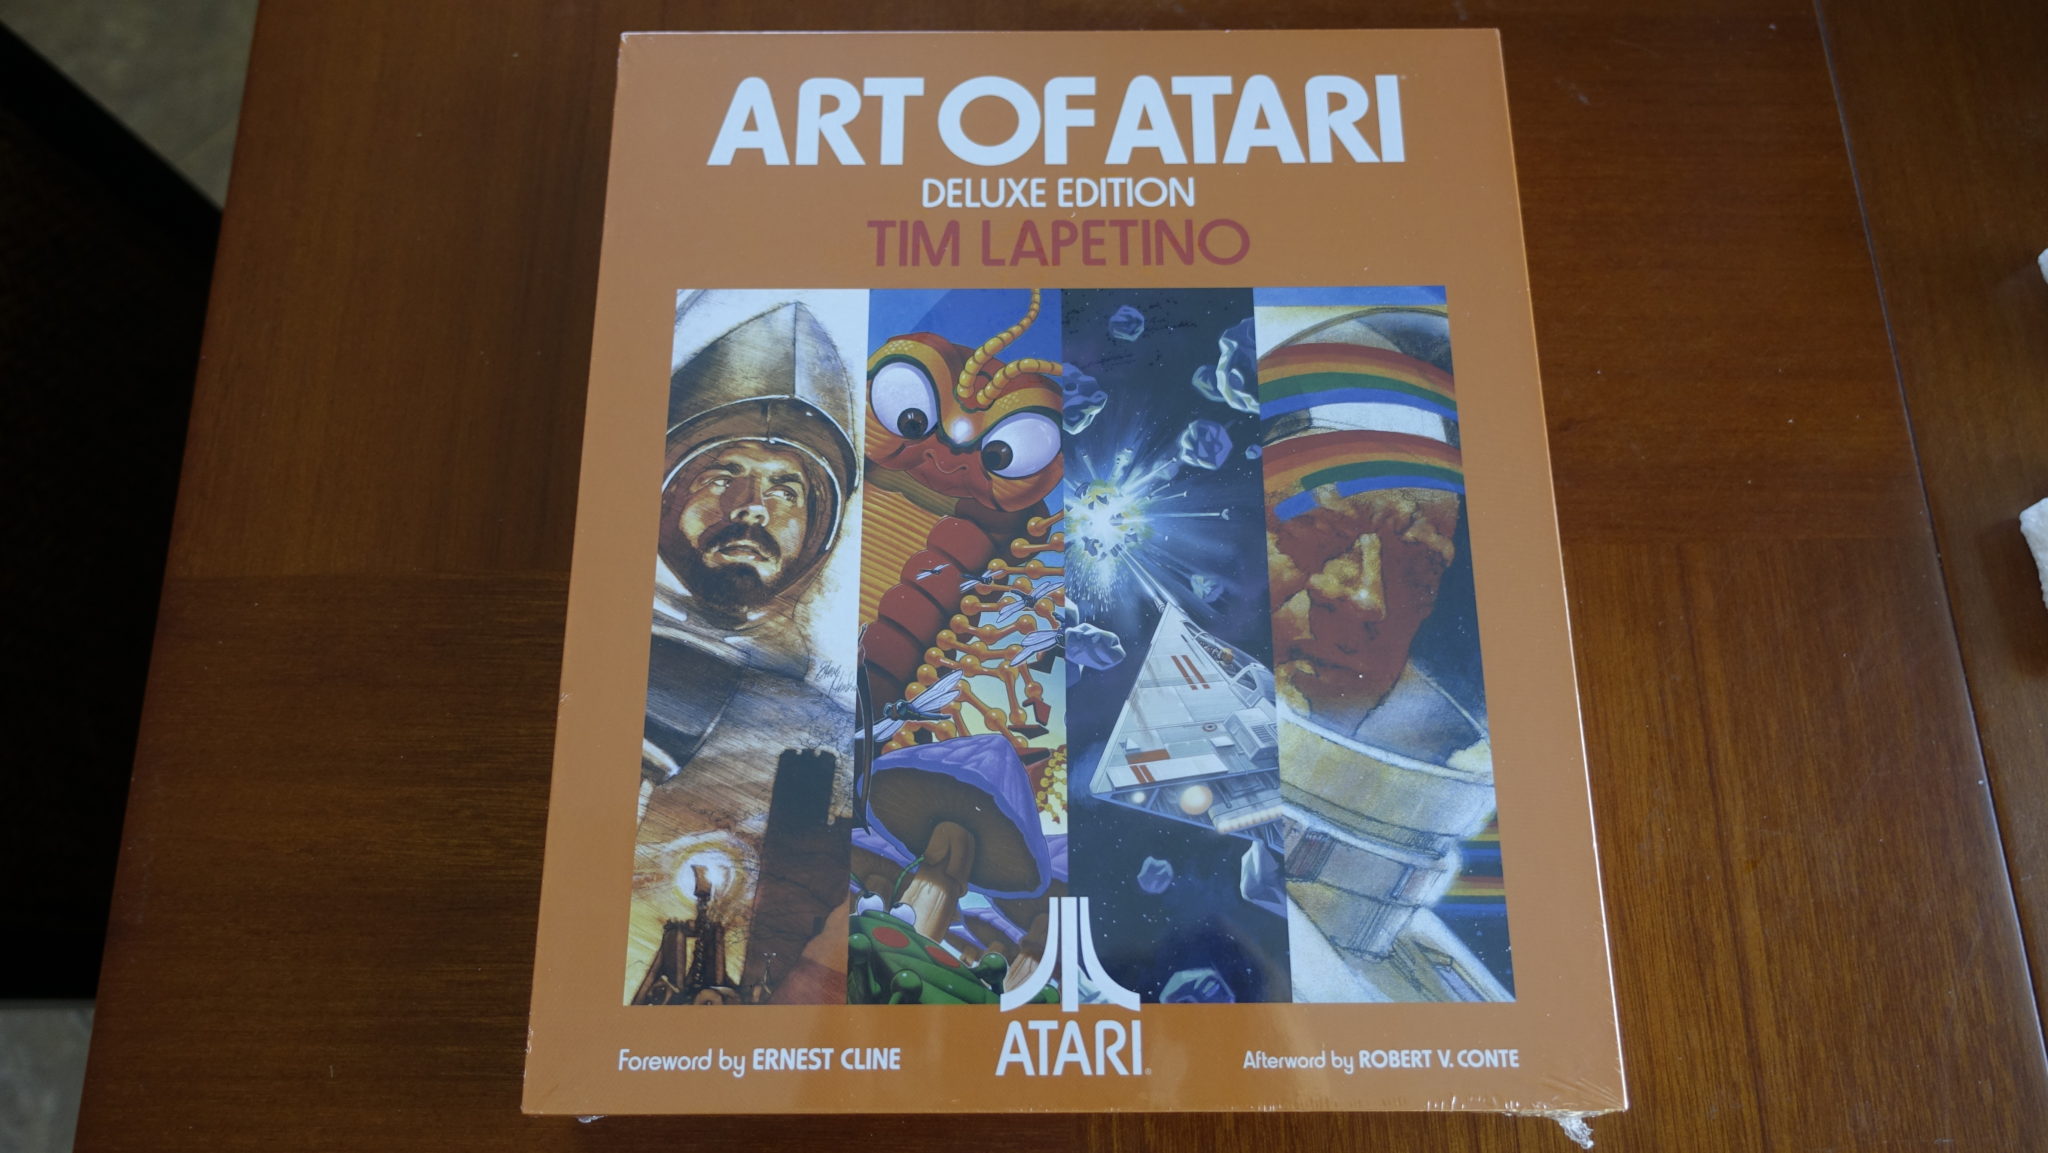 Art of Atari Extended Edition by Tim Lapetino